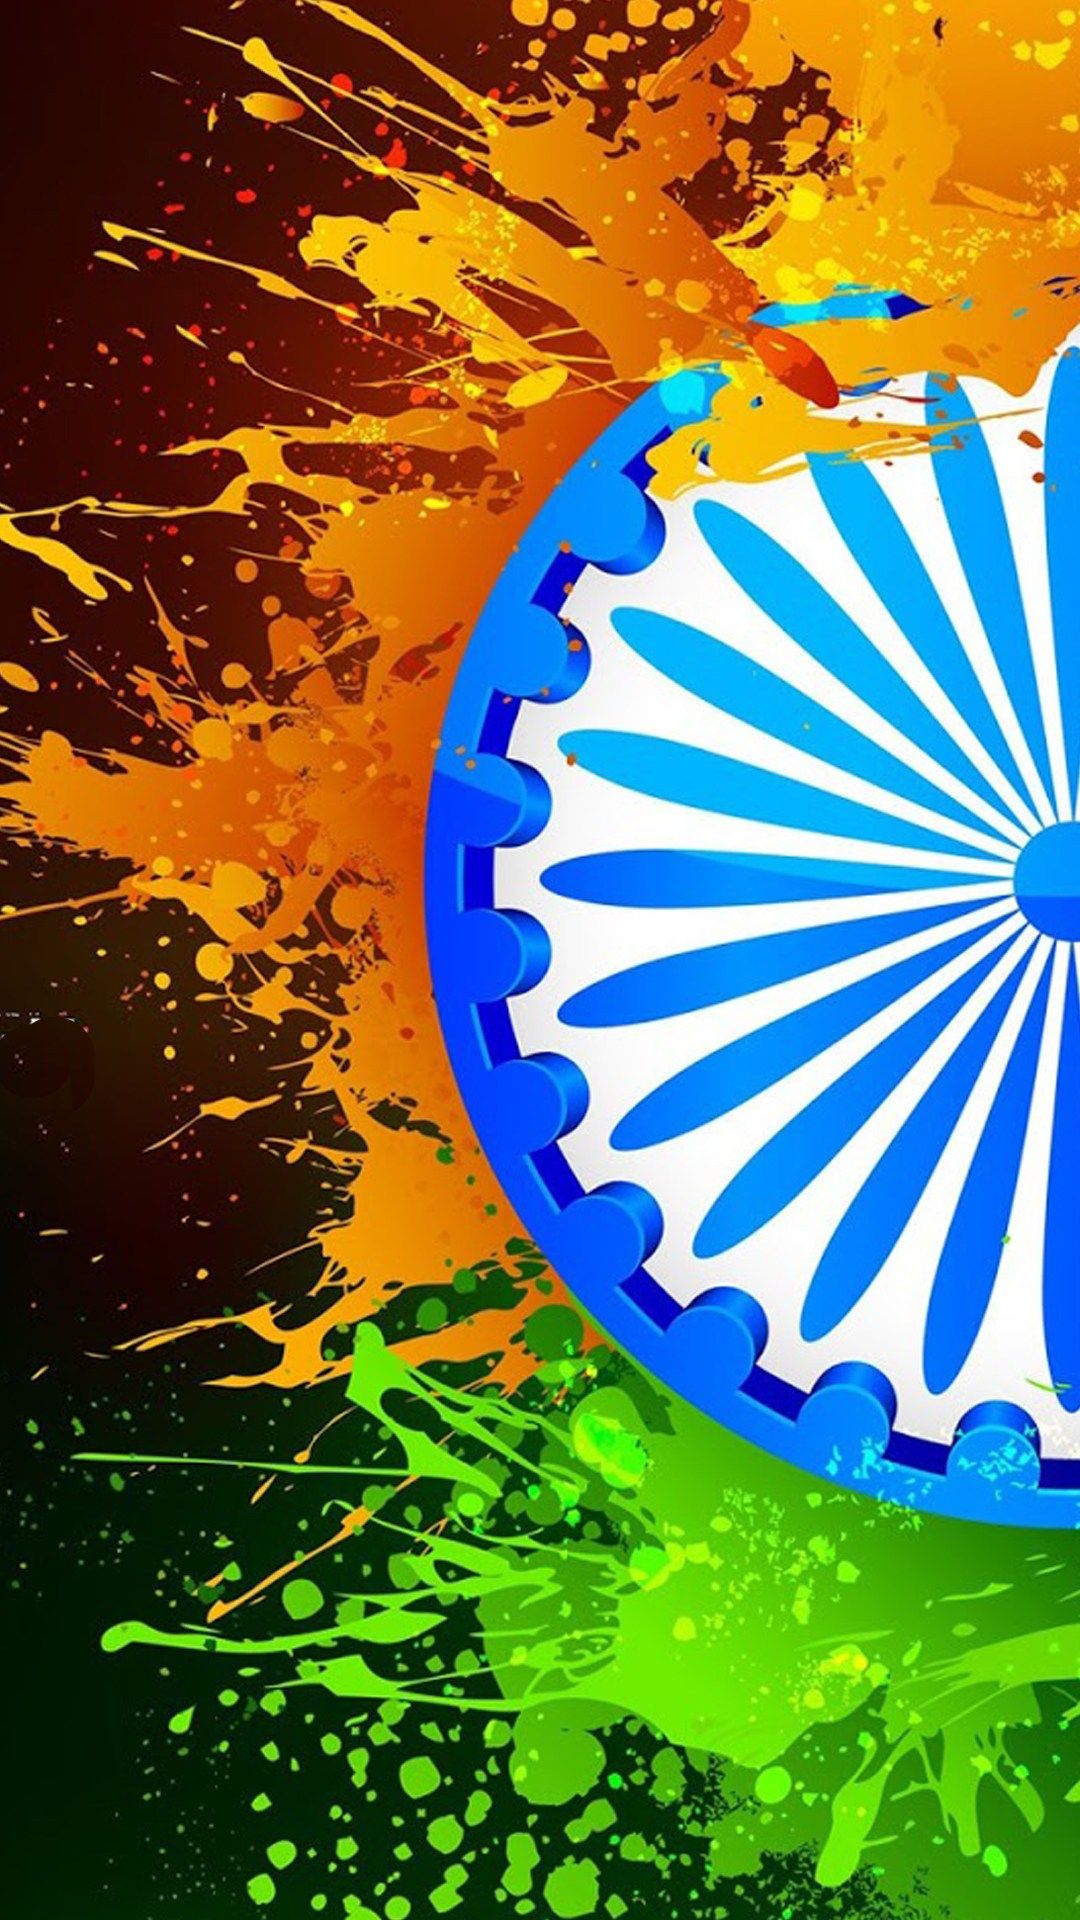 National Flag Image for WhatsApp of 10 India Republic Day Wallpaper Wallpaper. Wallpaper Download. High Resolution Wallpaper. Indian flag wallpaper, National flag india, India flag